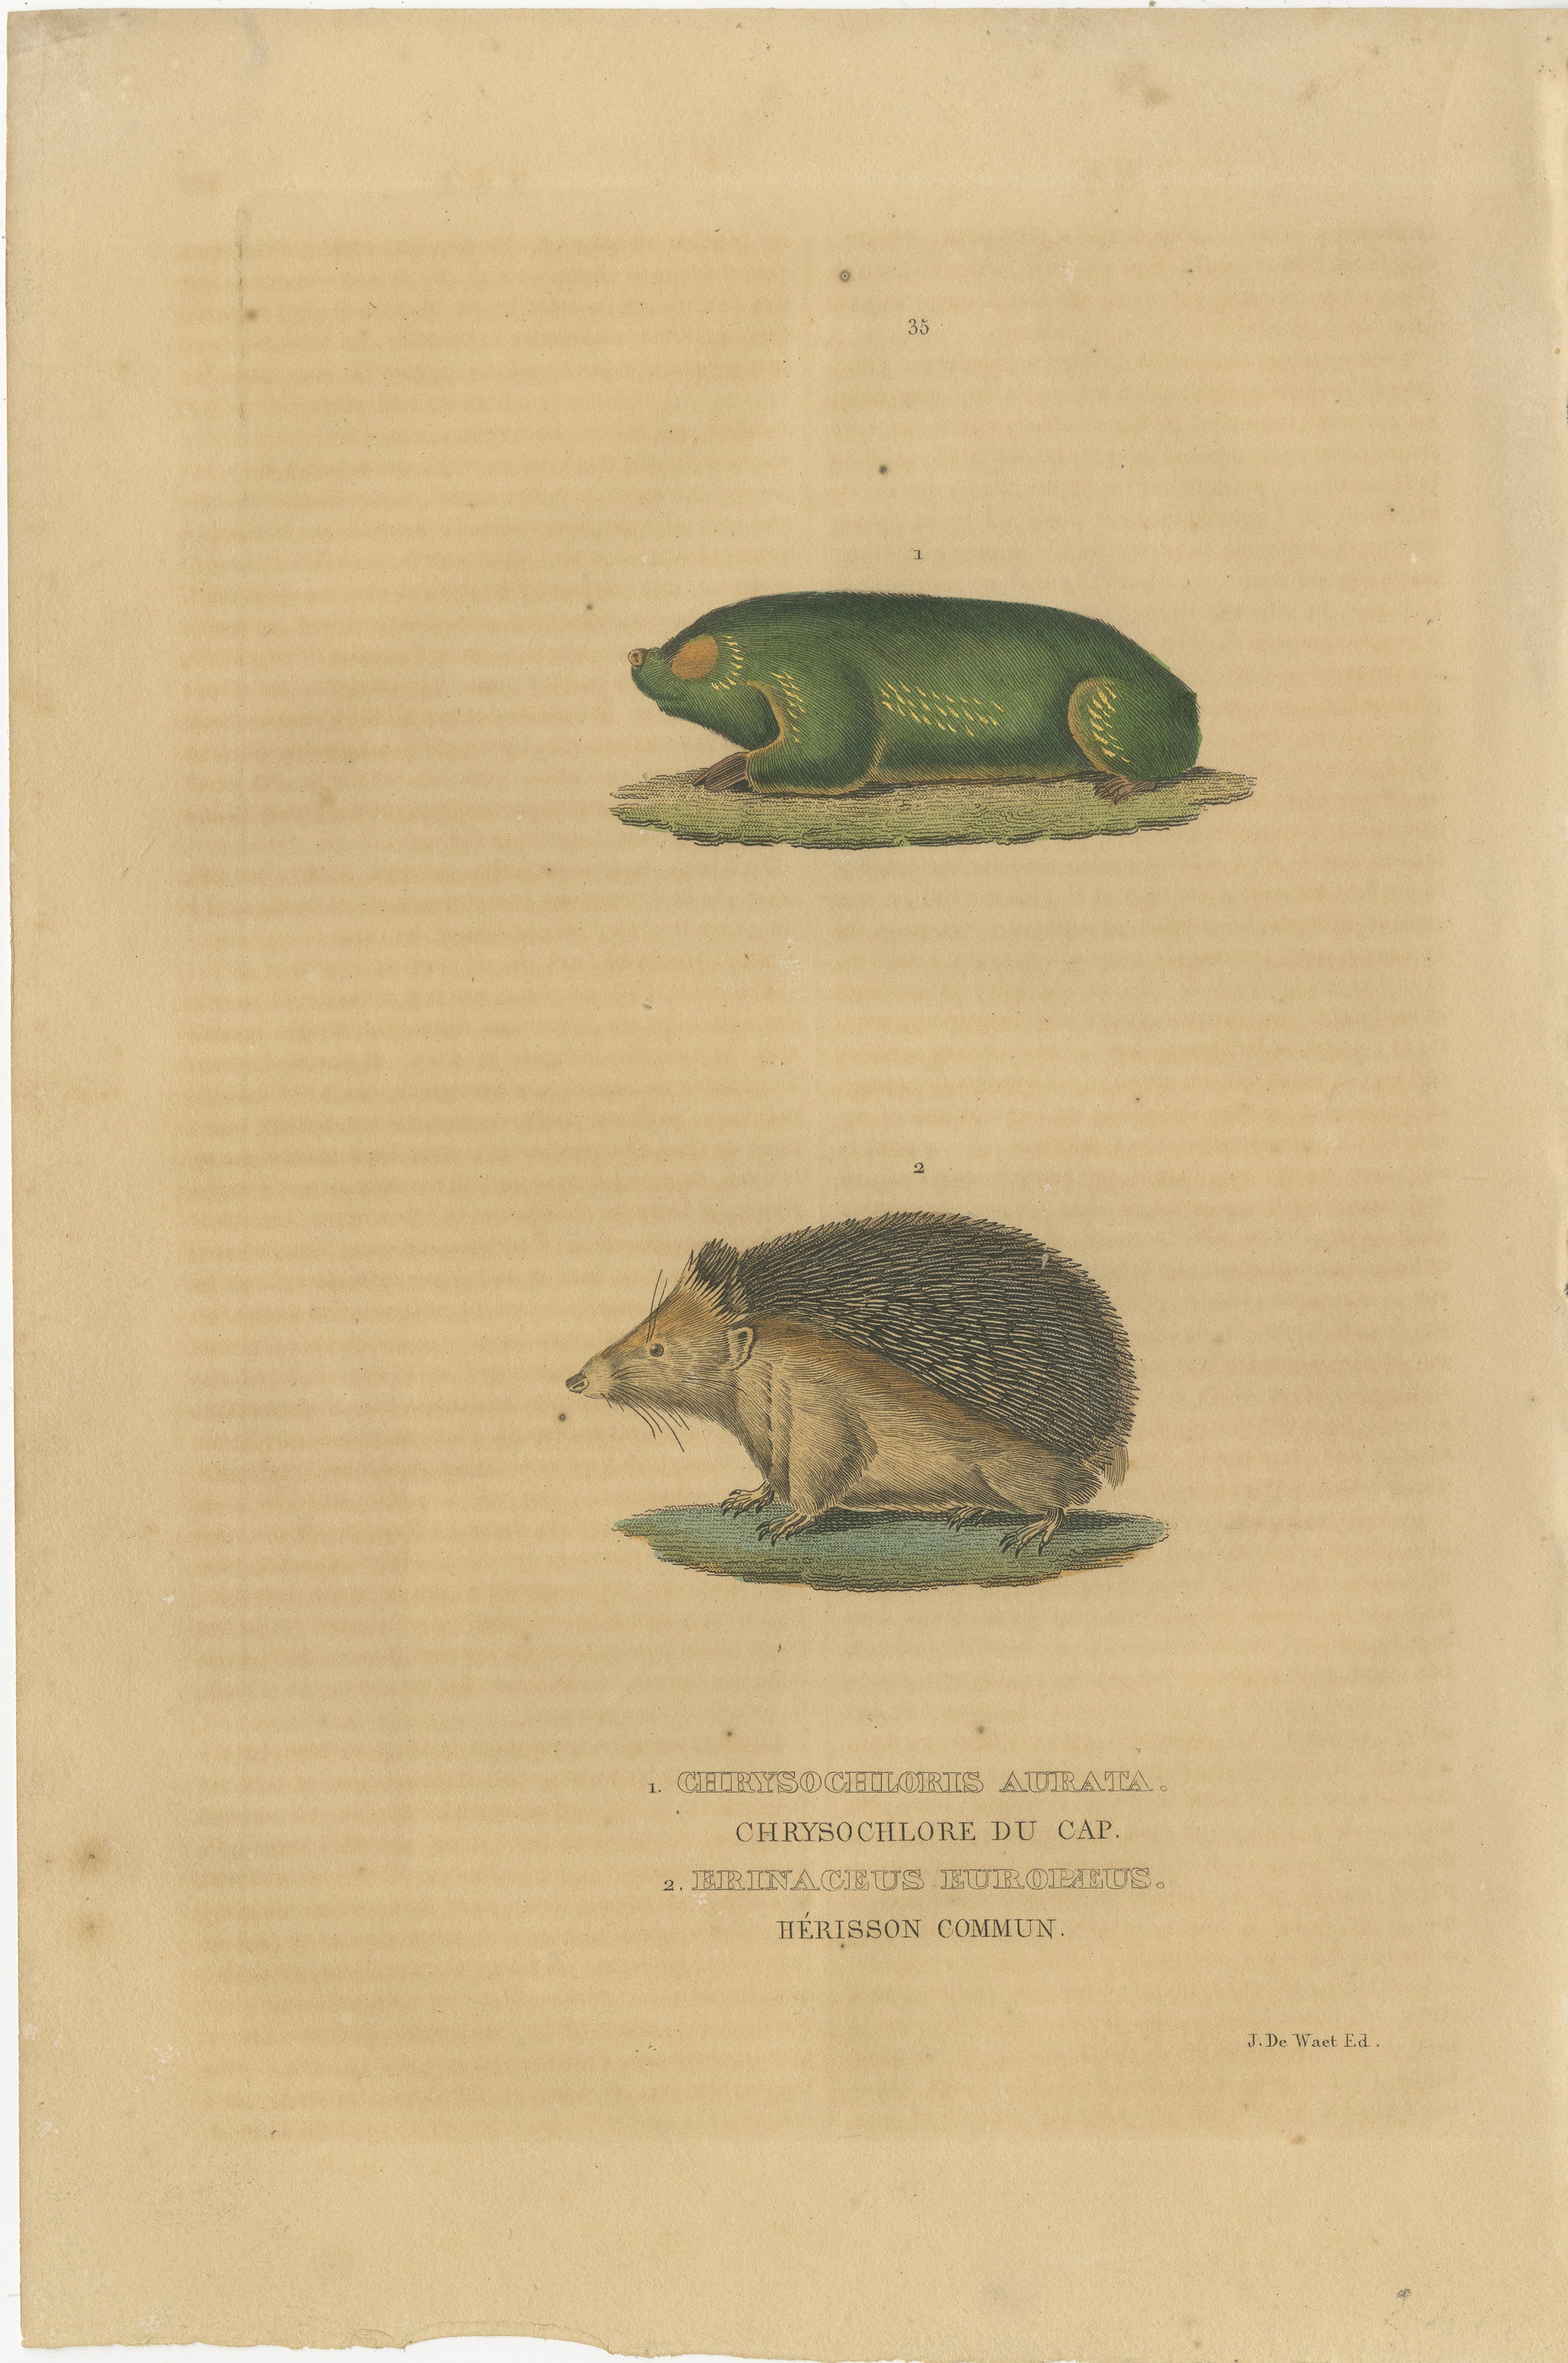 The image depicts two different animals, each labeled in French:

1. **Chrysochloris aurata** - This is commonly known as the Cape golden mole. It is characterized by its cylindrical body covered in dense, soft fur that can appear iridescent, hence